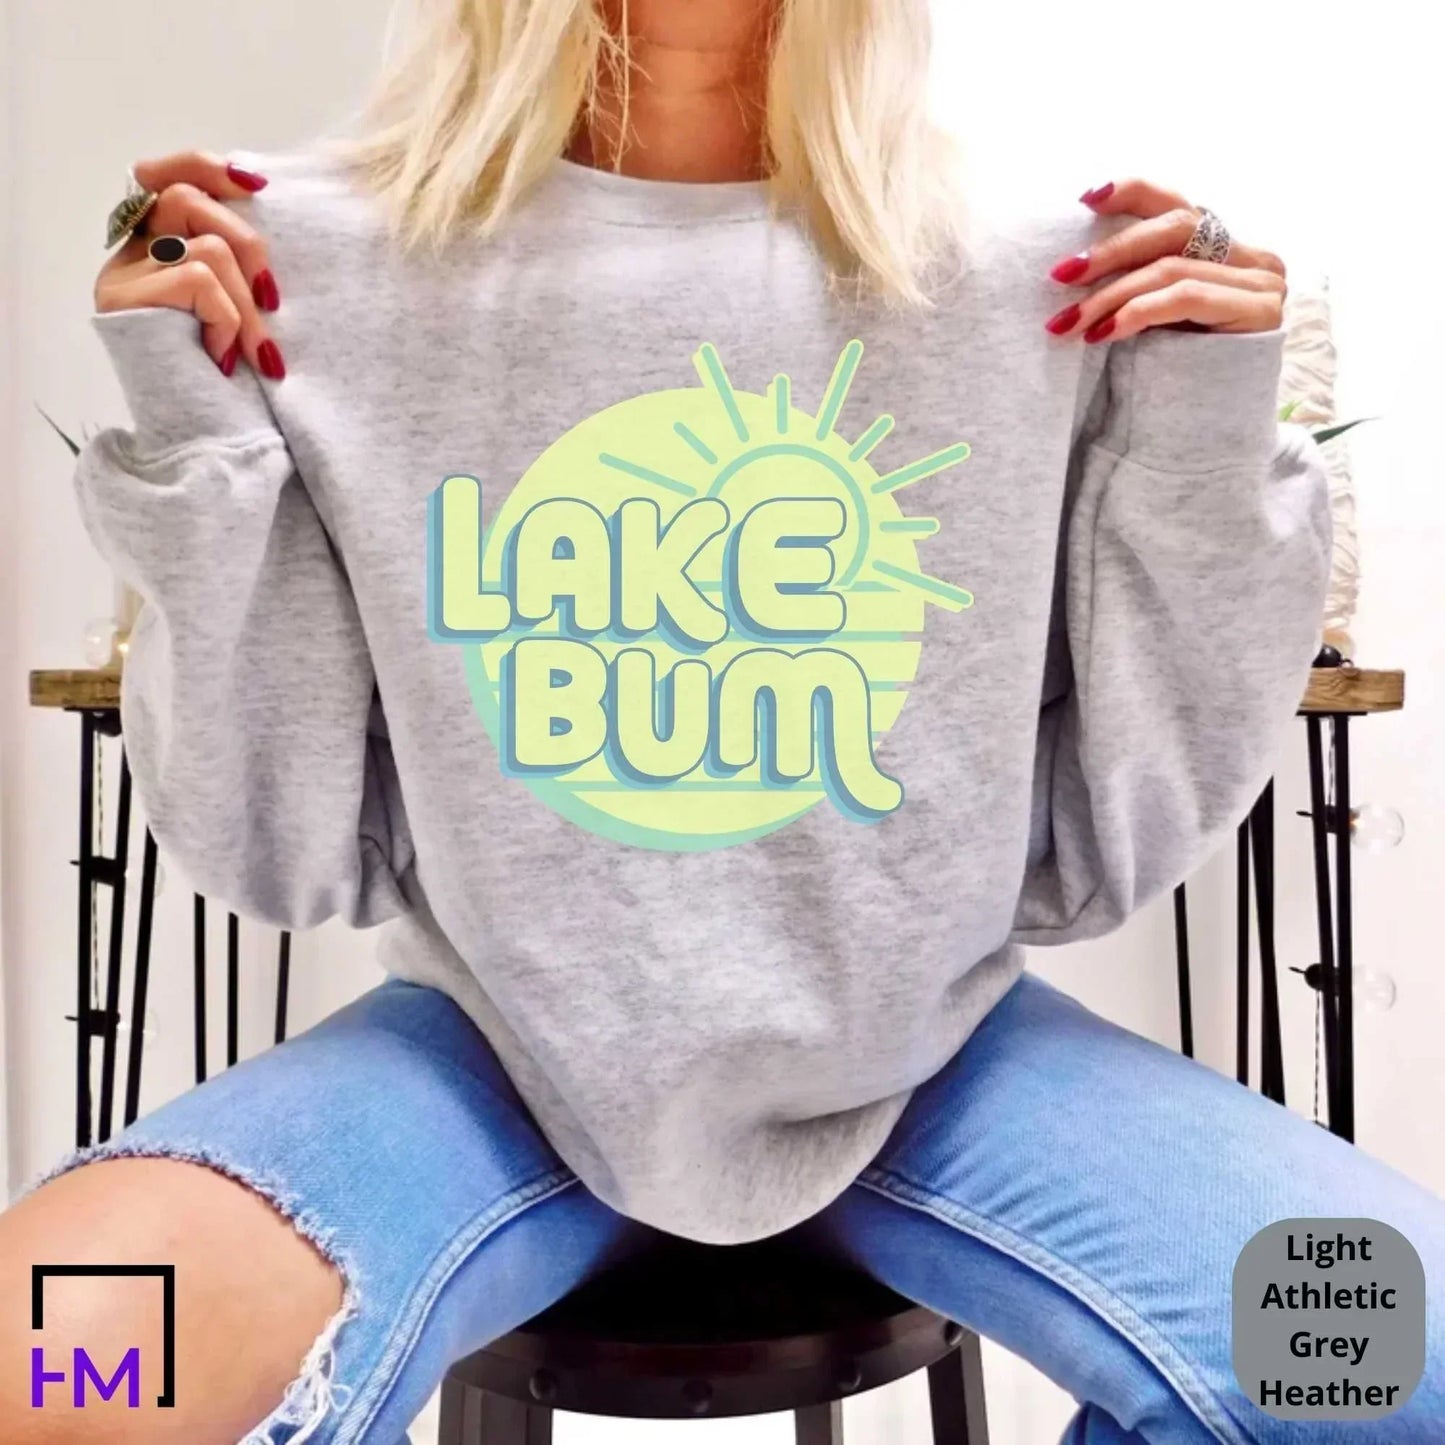 Lake Bum Shirt, Live at the Lake Lover Tee, Boating Tee, Great Boating Gift for Her, Vintage Look Boating Shirt, Lake Tee, Boating Life Tee HMDesignStudioUS